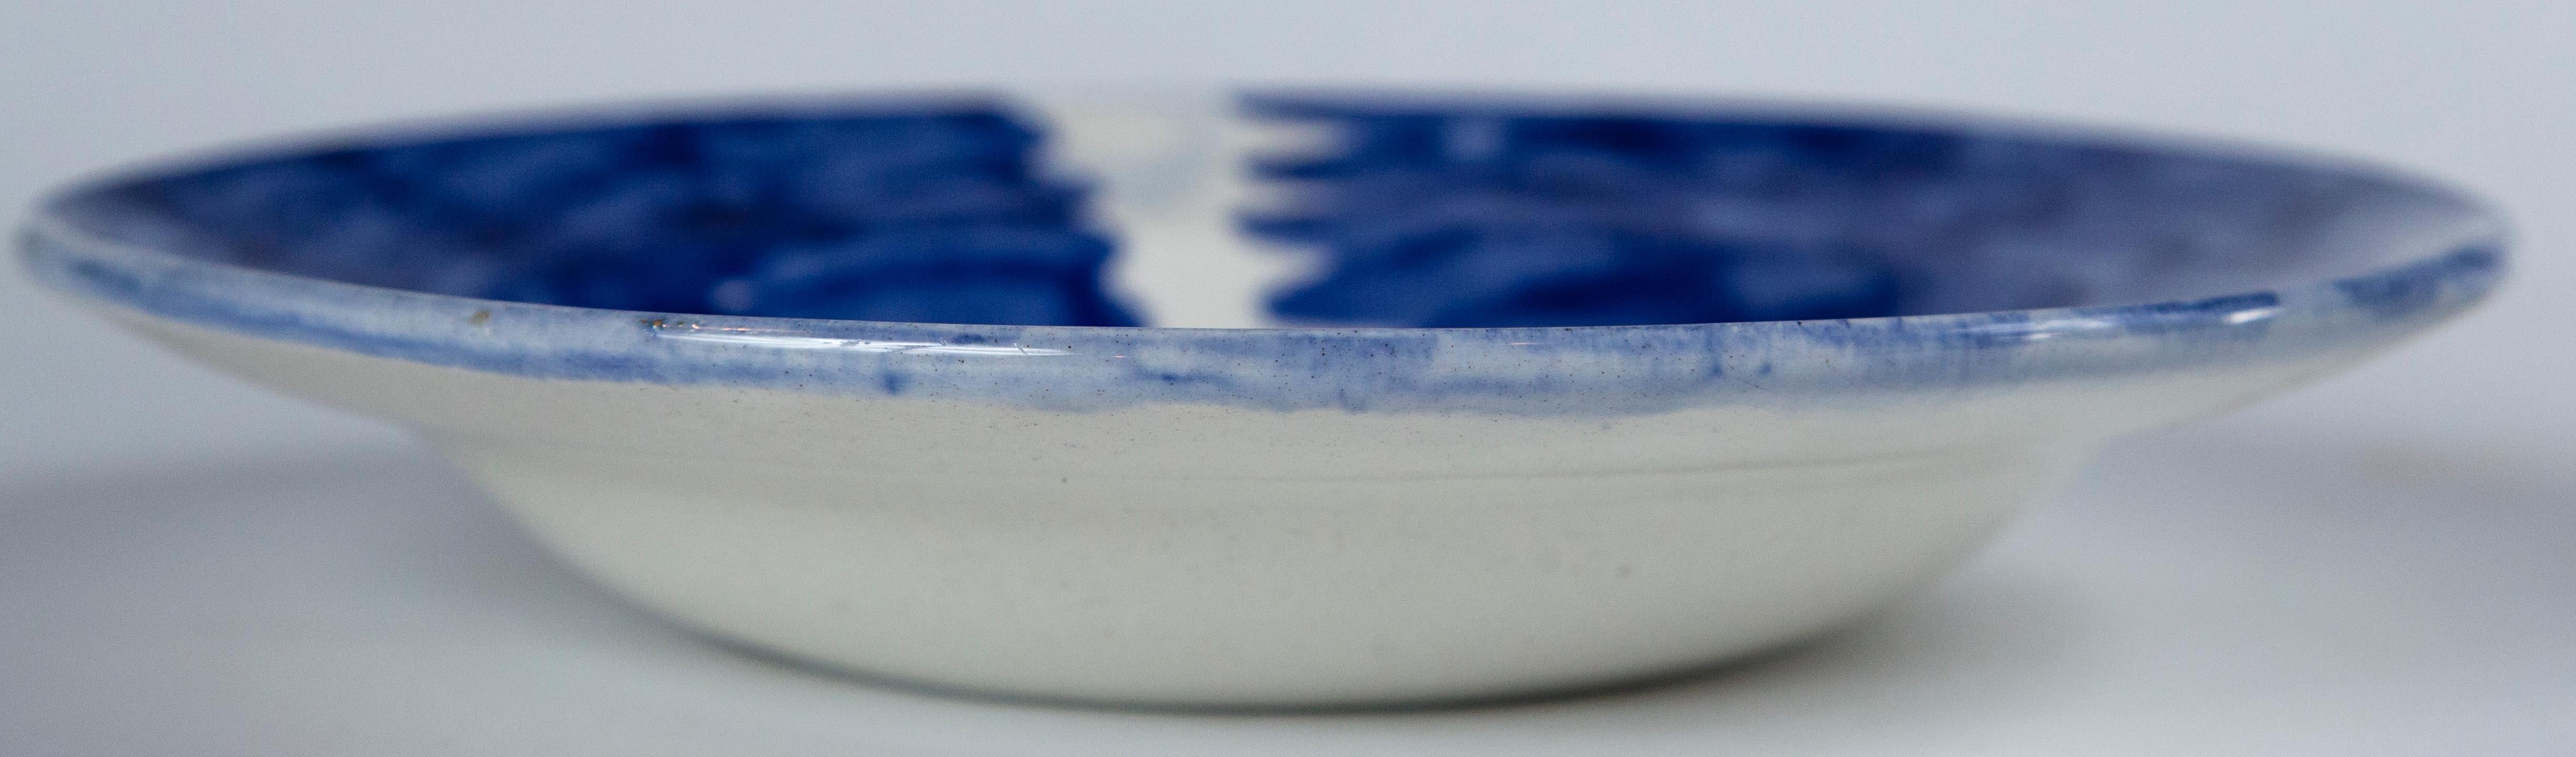 Pair of Hand Painted Blue and White Ceramic Bowls, Europe, Mid-20th Century 2